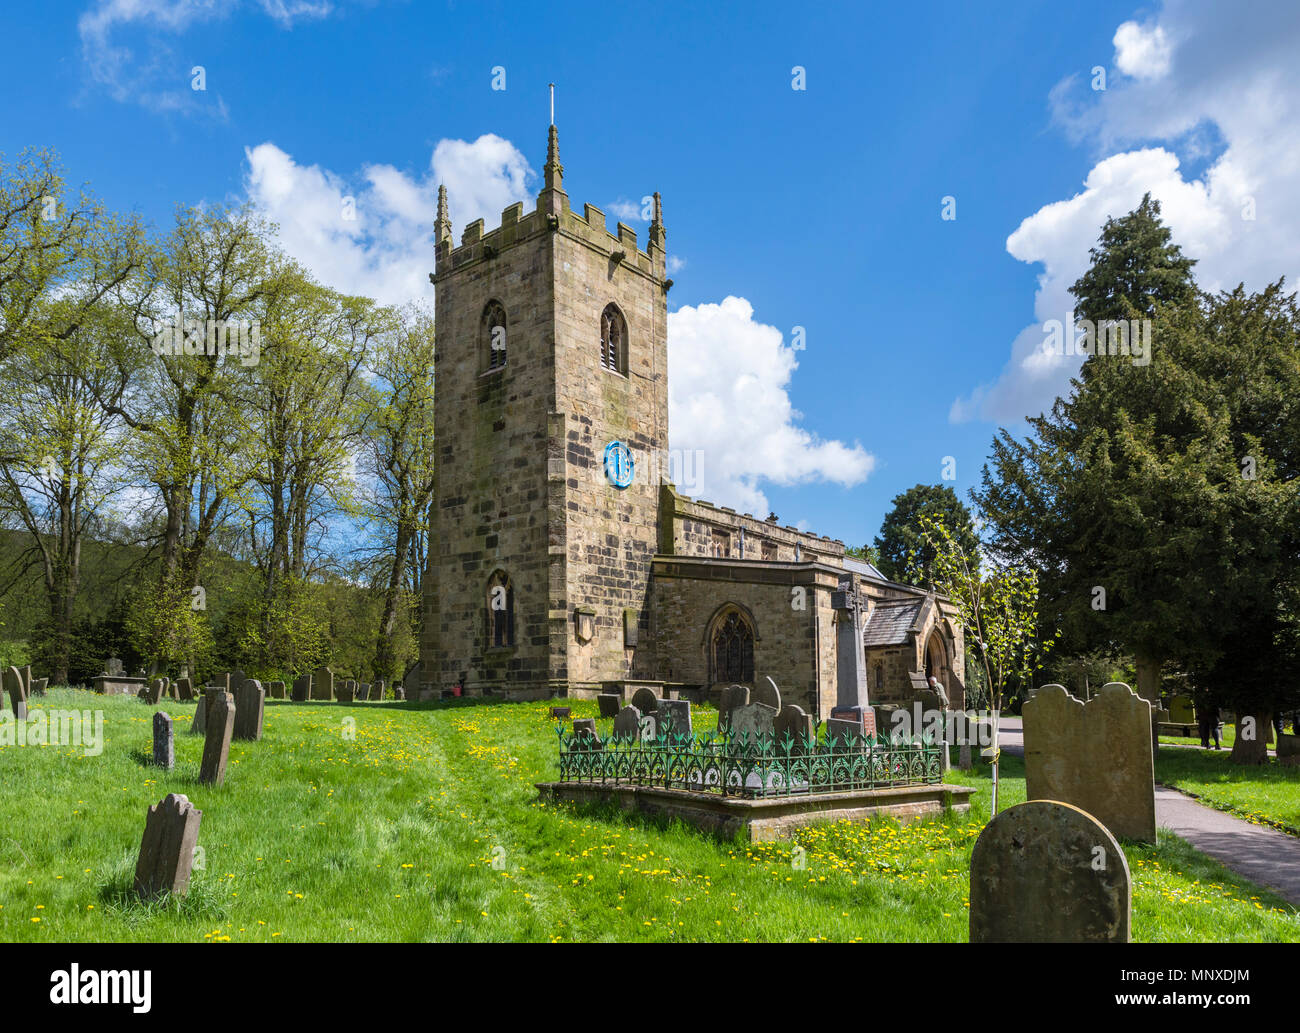 The Parish Church in Eyam, Peak District, Derbyshire, England, UK. Eyam  IS sometimes referred to as the Plague Village. Stock Photo